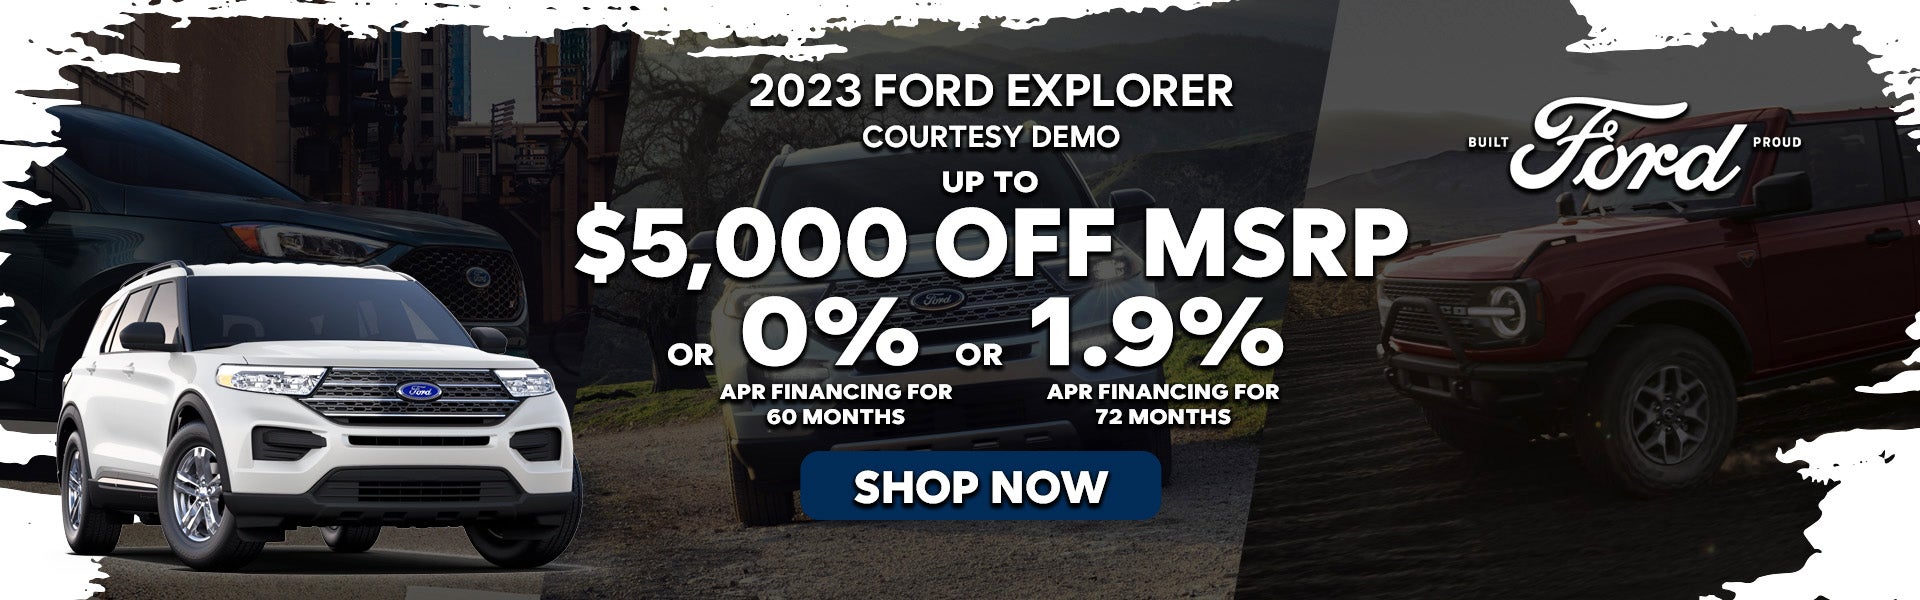 2023 Ford Explorer Courtesy Vehicle Special Offer